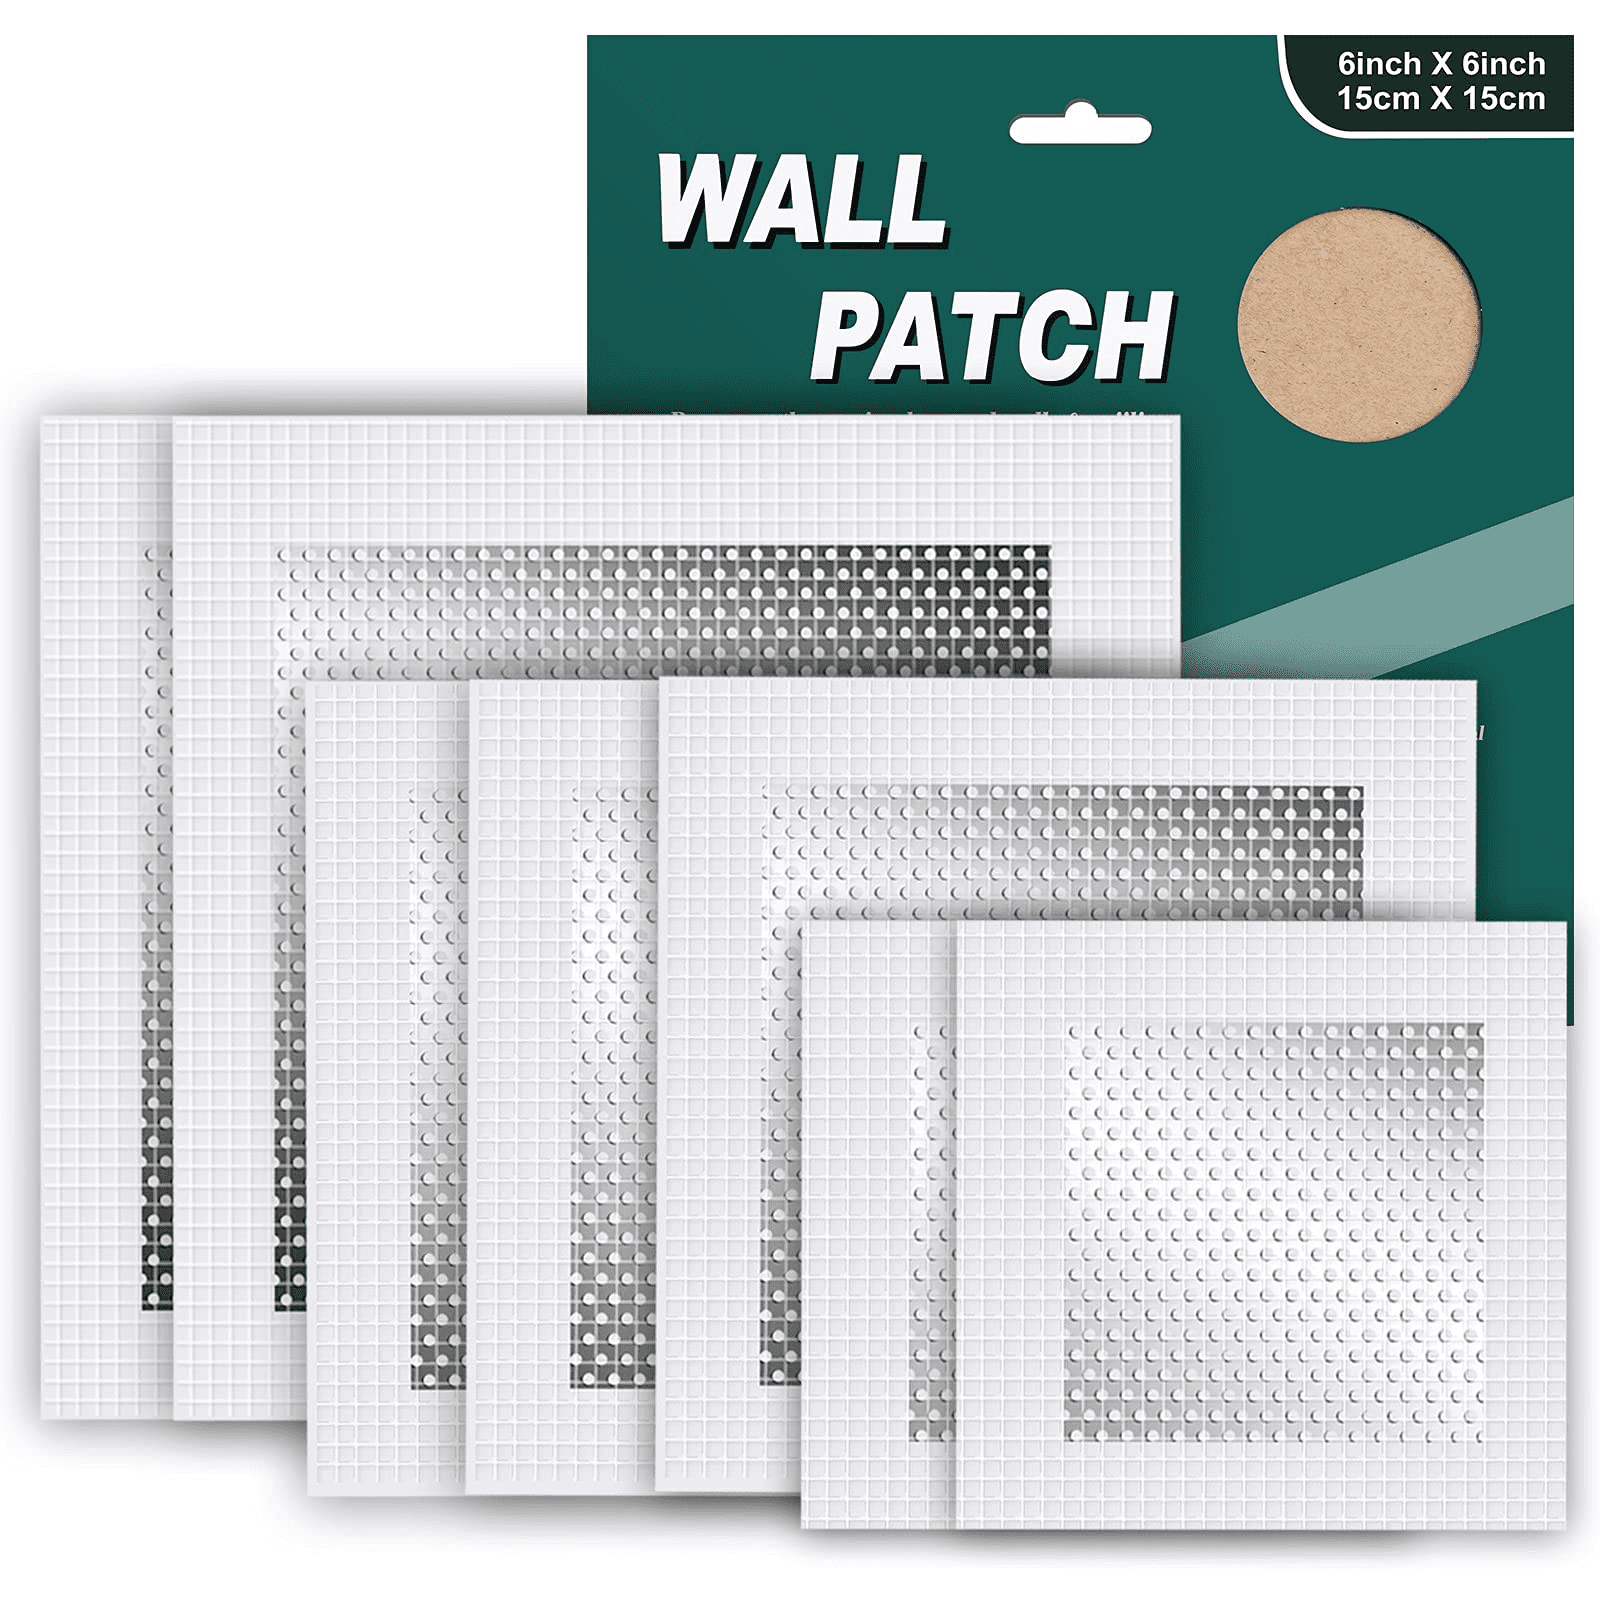 (7PACK) Wall Patch Repair Kit,Drywall Repair Kit,2/4/6 inch Drywall Patch  ,Dry Wall Patch Kits Wall Patch with Extended Self-Adhesive Mesh White